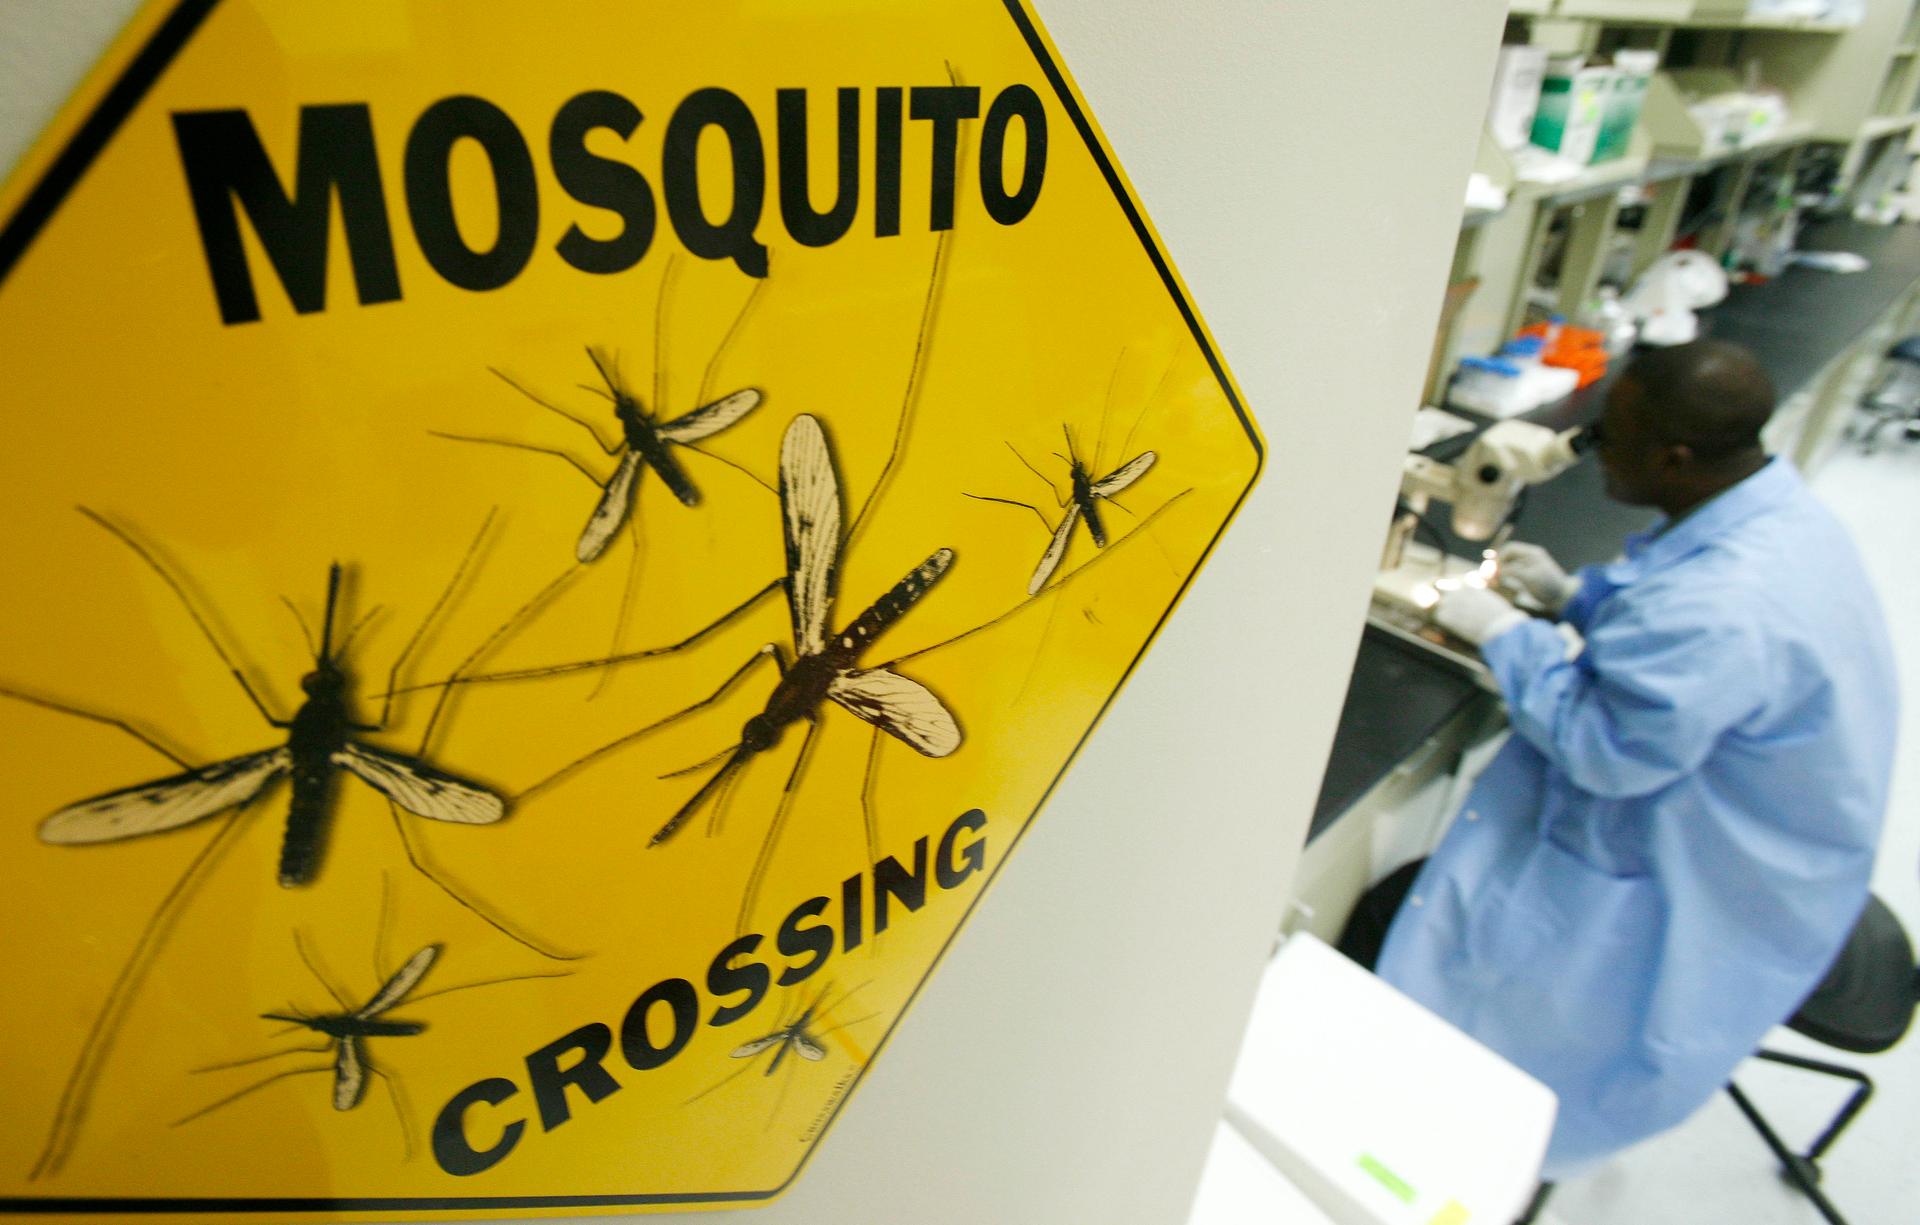 A scientist dissects a mosquito at a research facility in Rockville, Maryland.